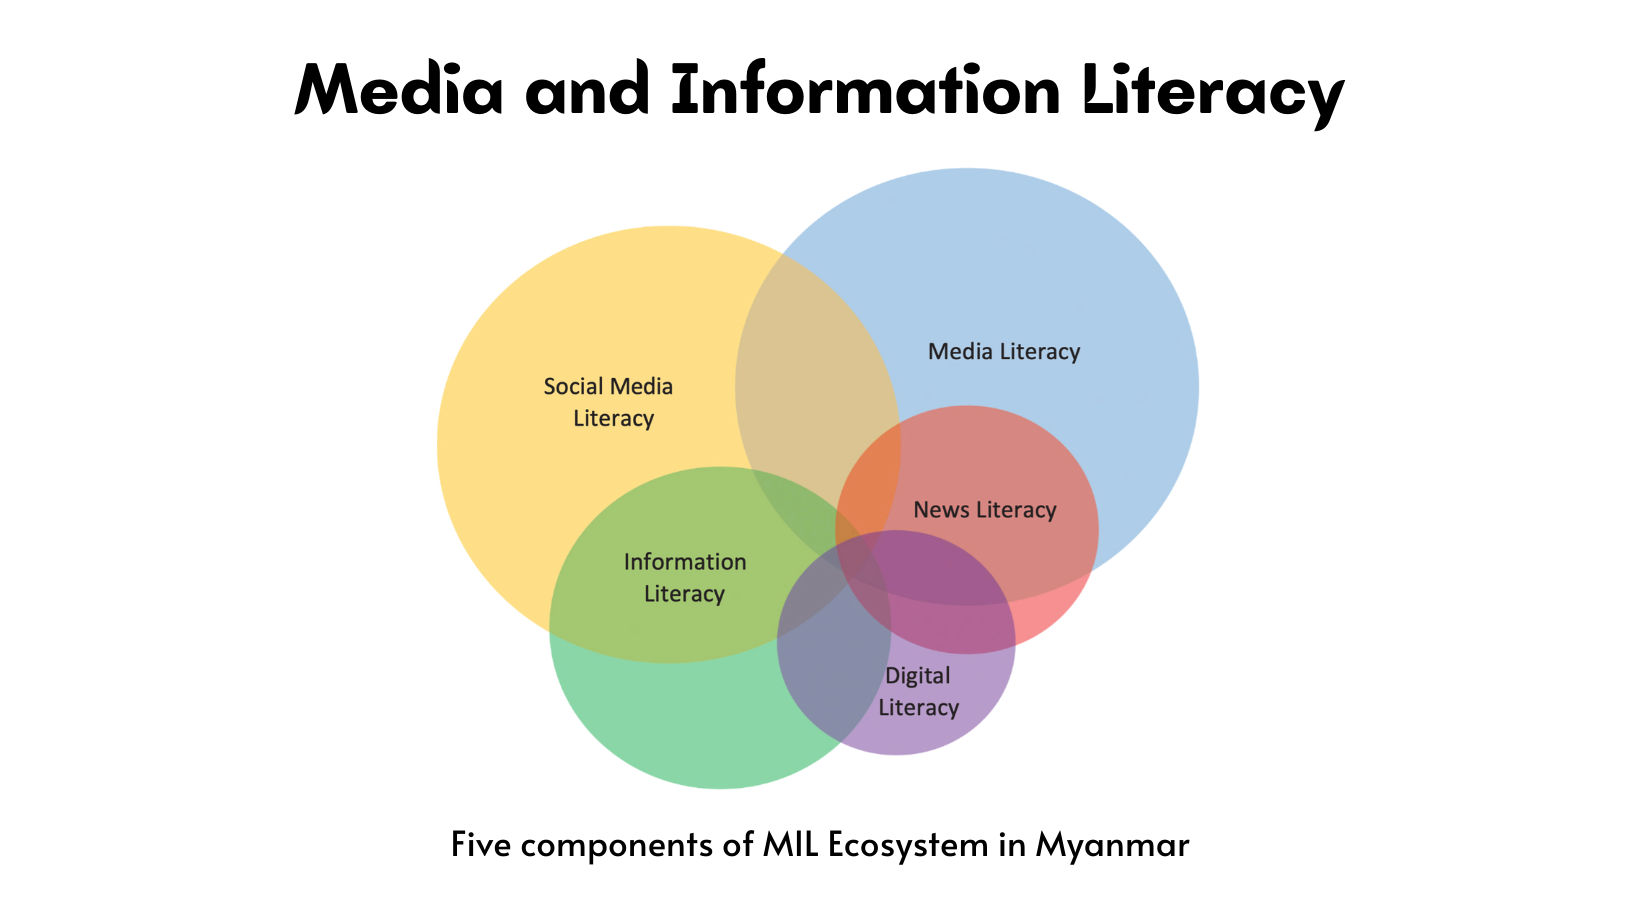 <p><span style="line-height: 107%; font-size: 24px;">Media
and Information Literacy (with focus on Digital Literacy)</span><br></p>